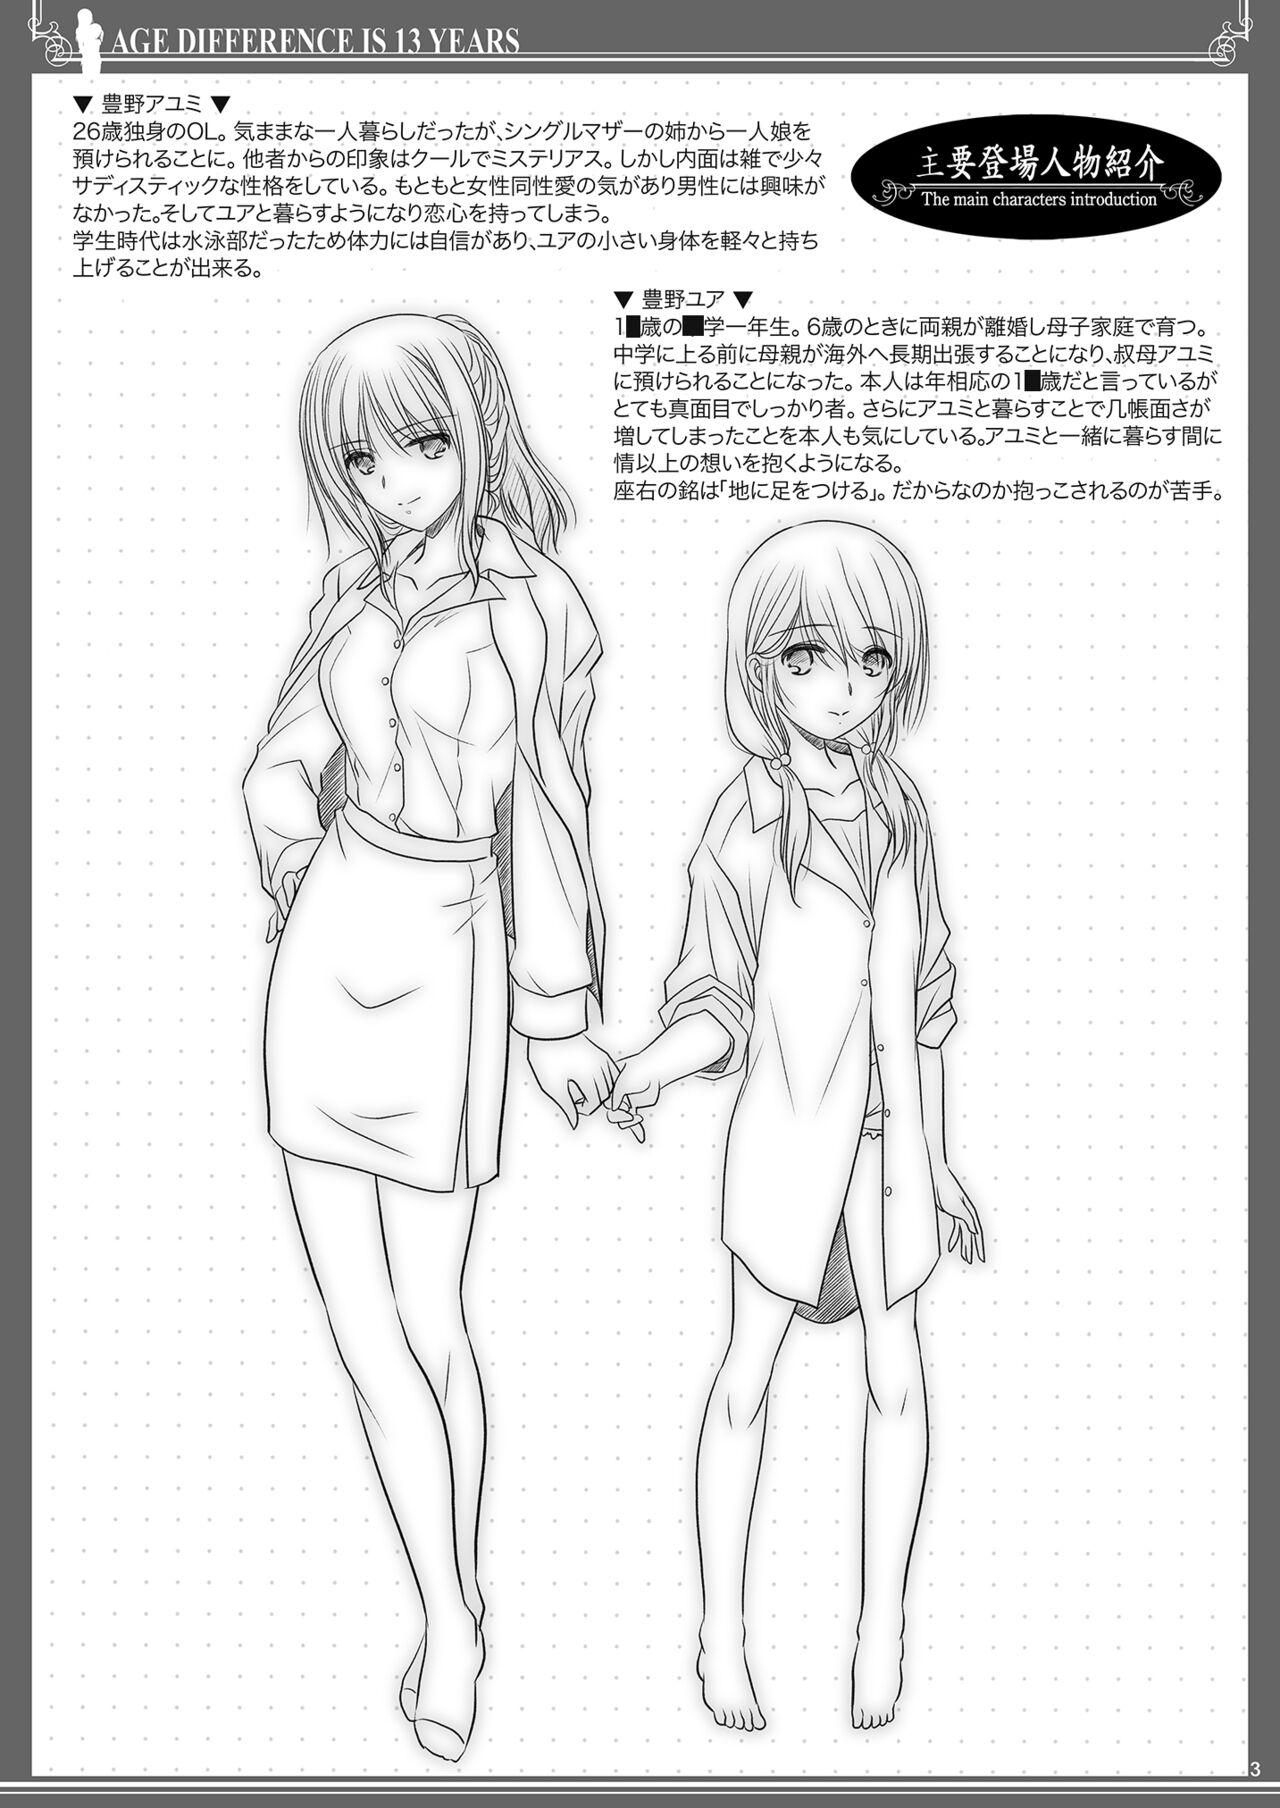 Cutie Toshi no Thirteen - Age Difference is 13 Years - Original Job - Picture 3